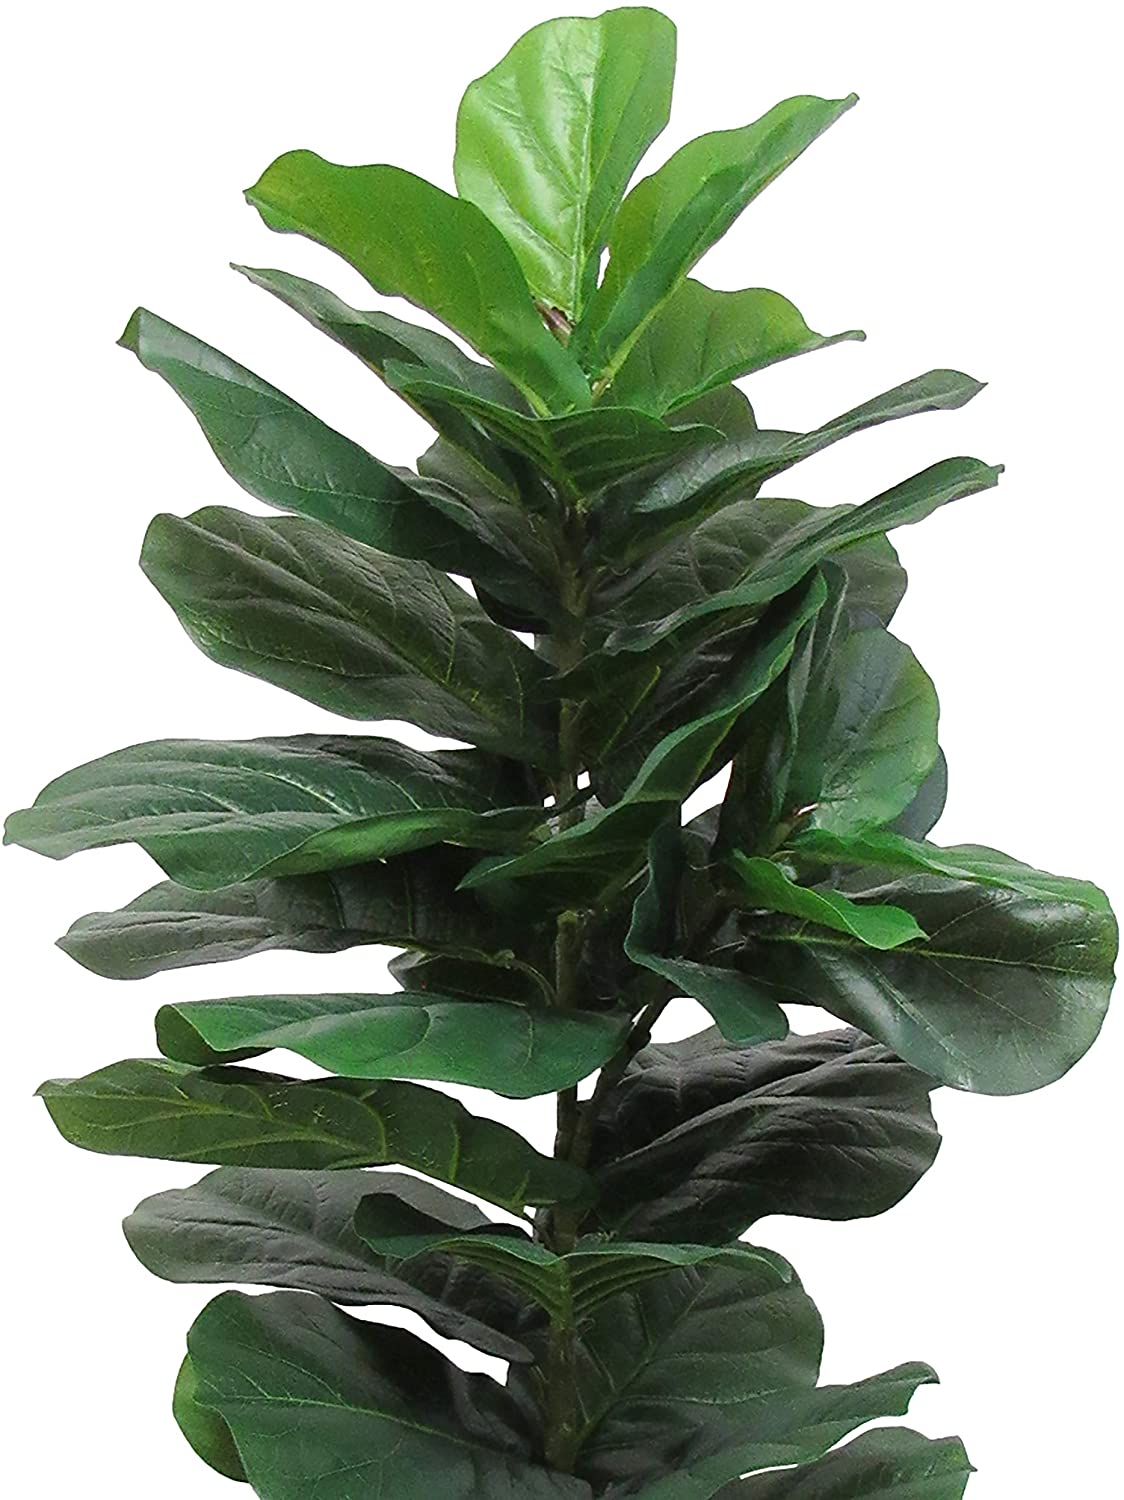 UKN 3 5ft Real Touch Leaf Fig Tree Pot 40" H X 20" W Dp Green